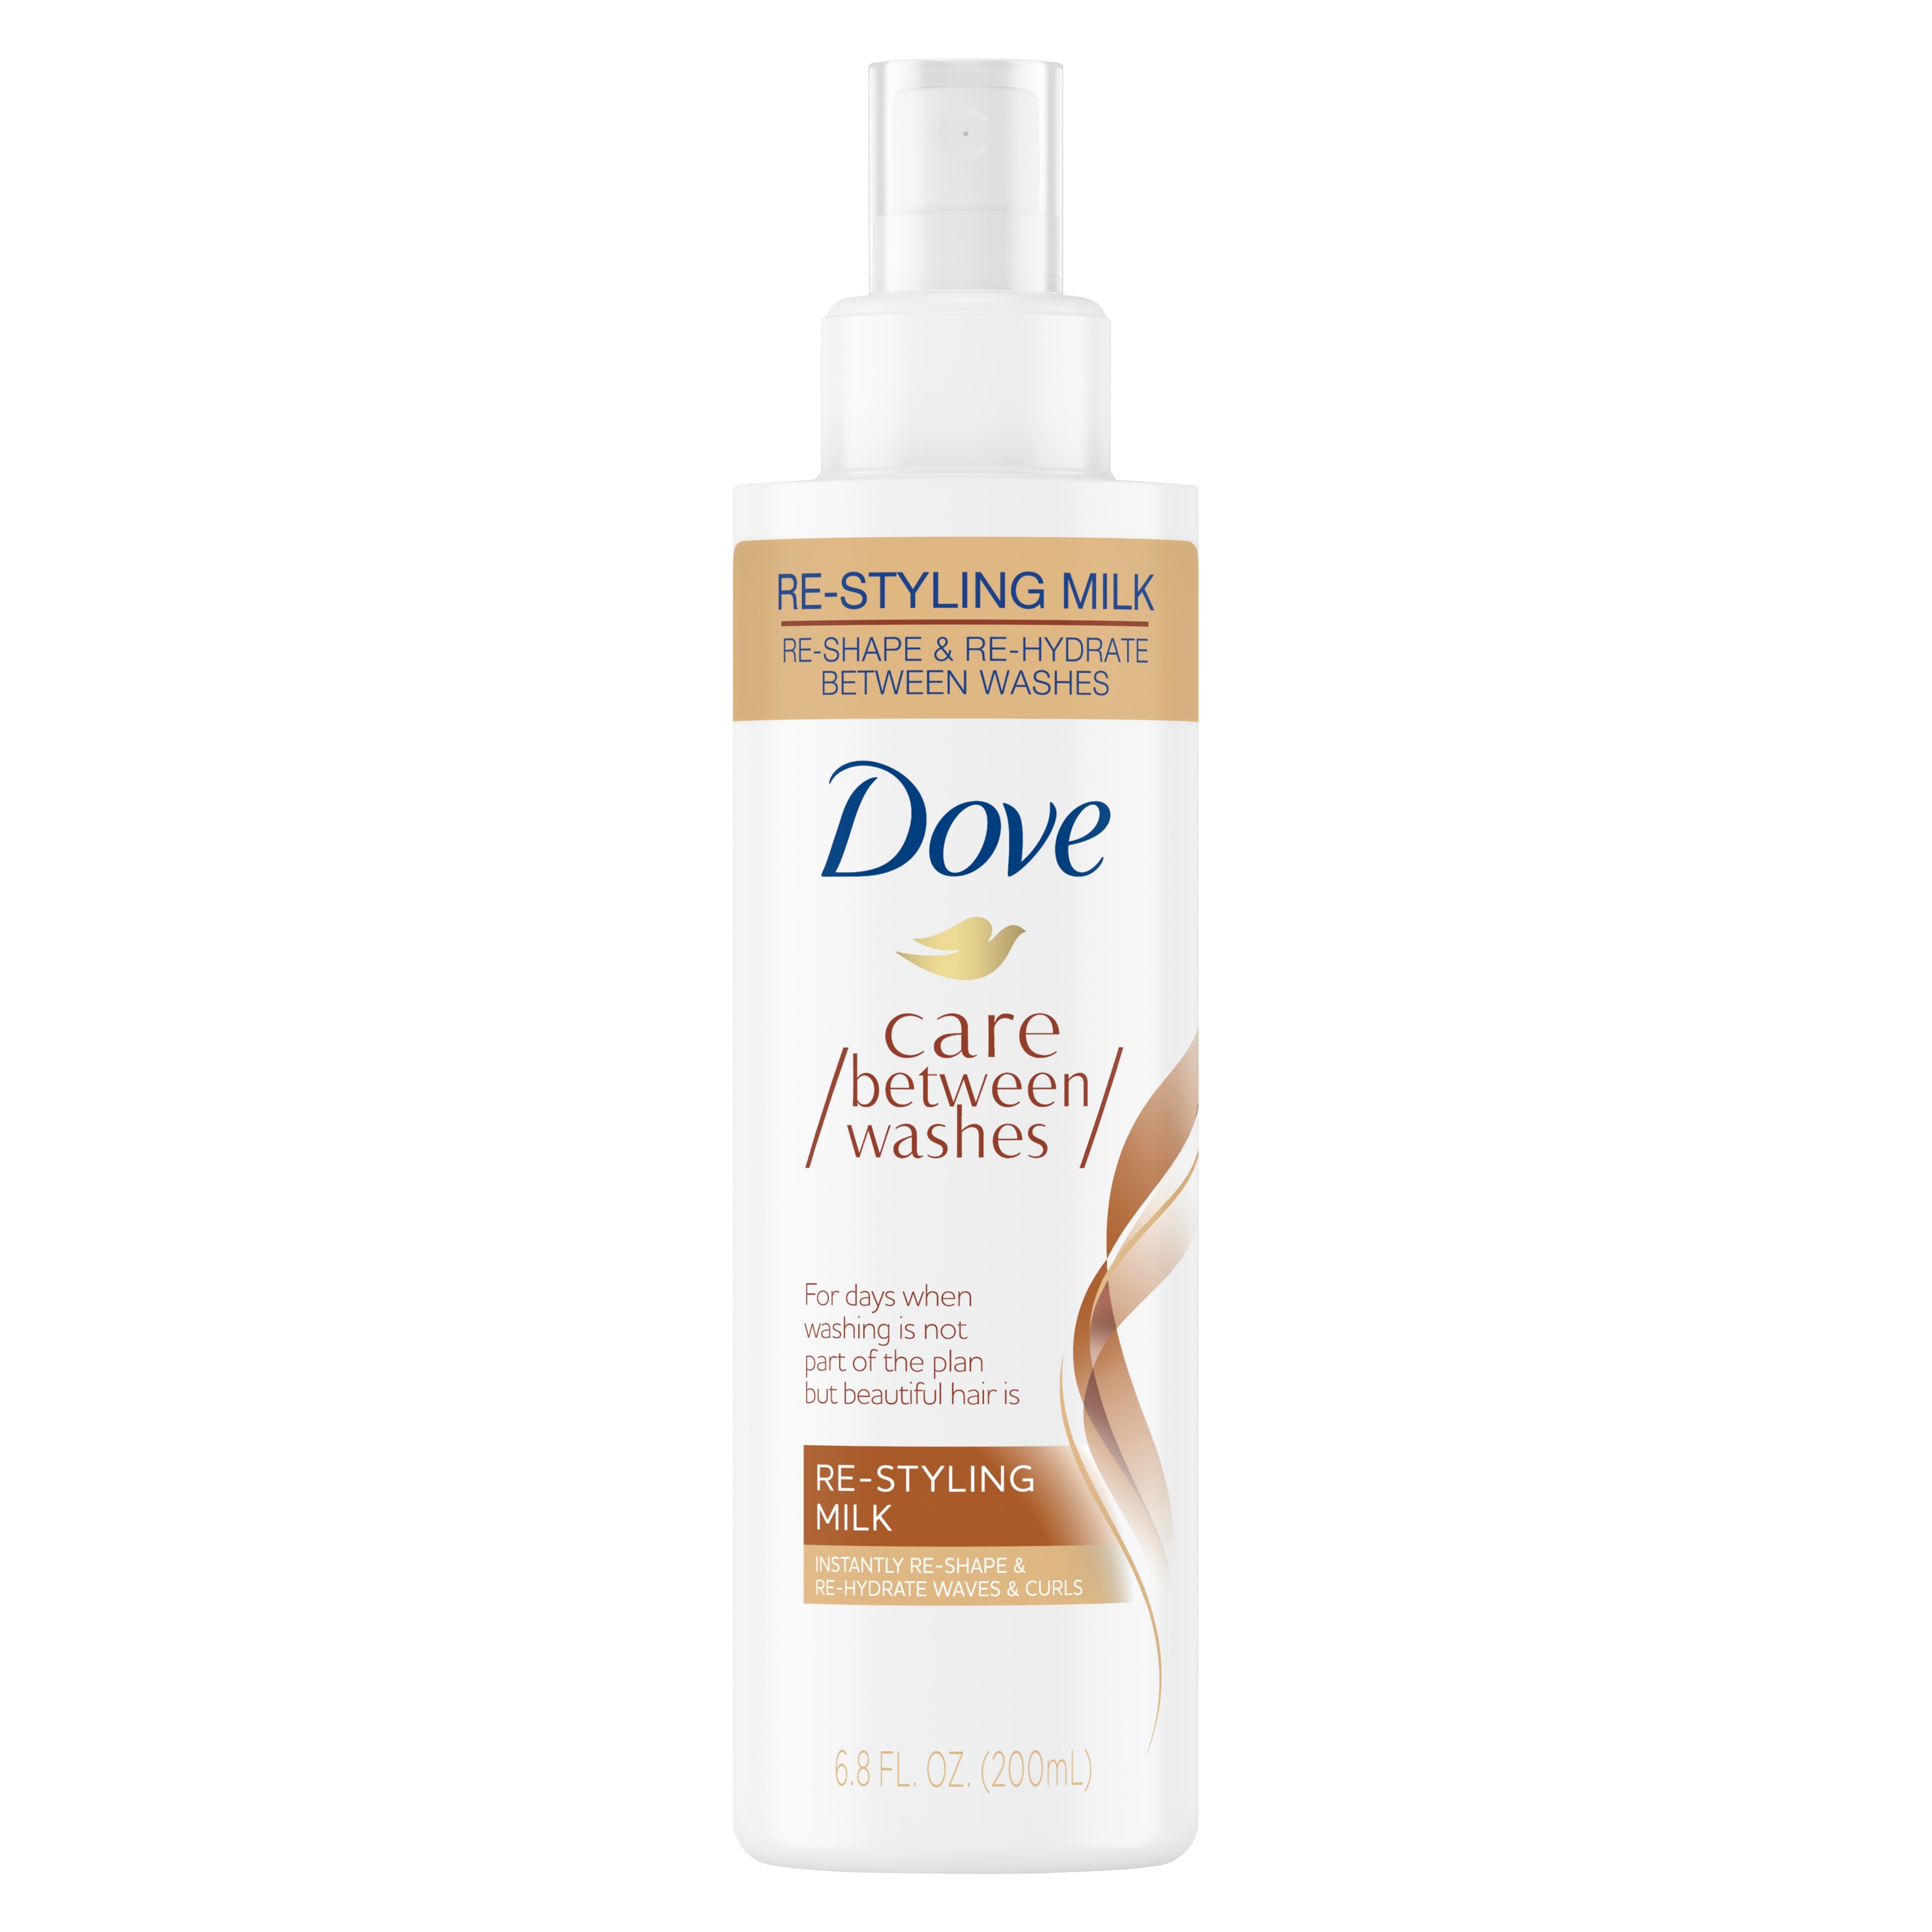 Dove Care Between Washes Restyler Re-Styling Milk 6.8 oz - image 1 of 10